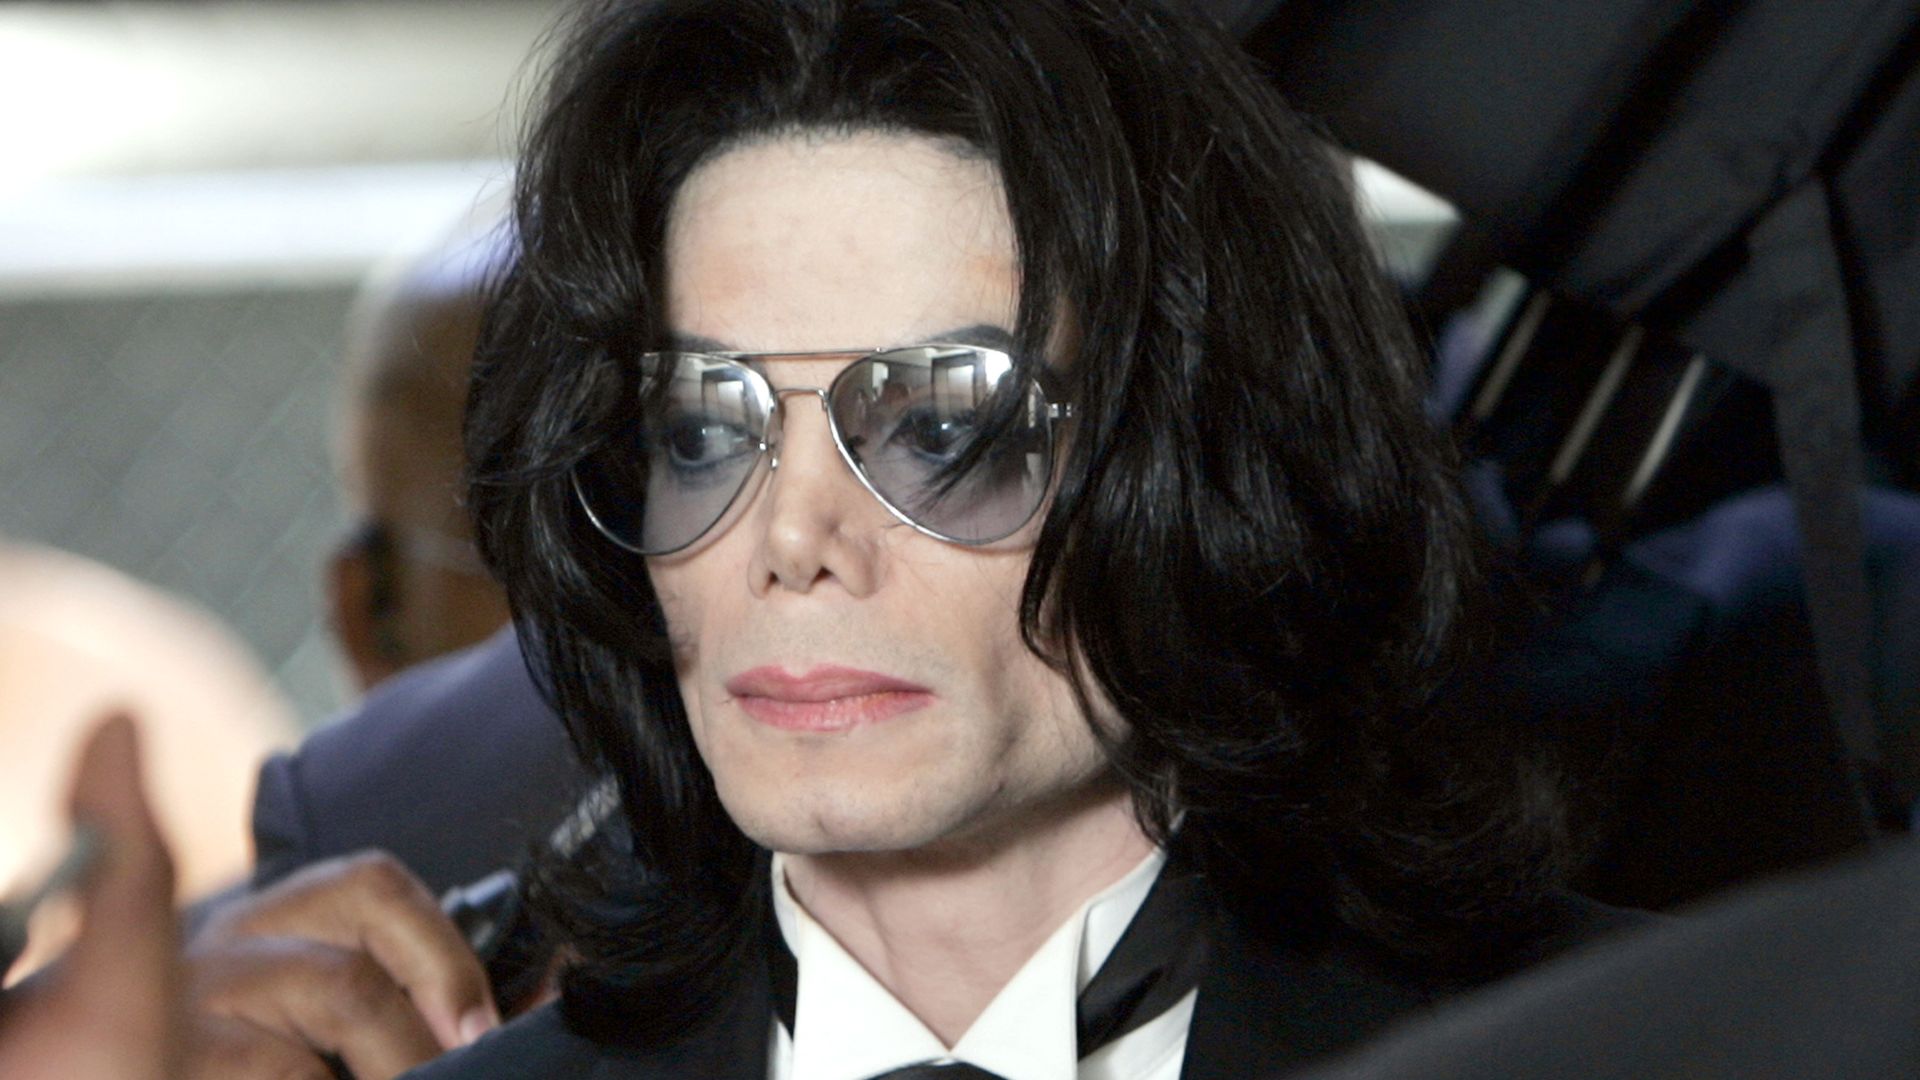 SANTA MARIA, CA - JUNE 13:  Michael Jackson prepares to enter the Santa Barbara County Superior Court to hear the verdict read in his child molestation case June 13, 2005 in Santa Maria, California. After seven days of deliberation the jury has reached a not guilty verdict on all 10 counts in the trial against Michael Jackson. Jackson was charged in a 10-count indictment with molesting a boy, plying him with liquor and conspiring to commit child abduction, false imprisonment and extortion. He pleaded innocent.  (Photo by Kevork Djansezian-Pool/Getty Images)